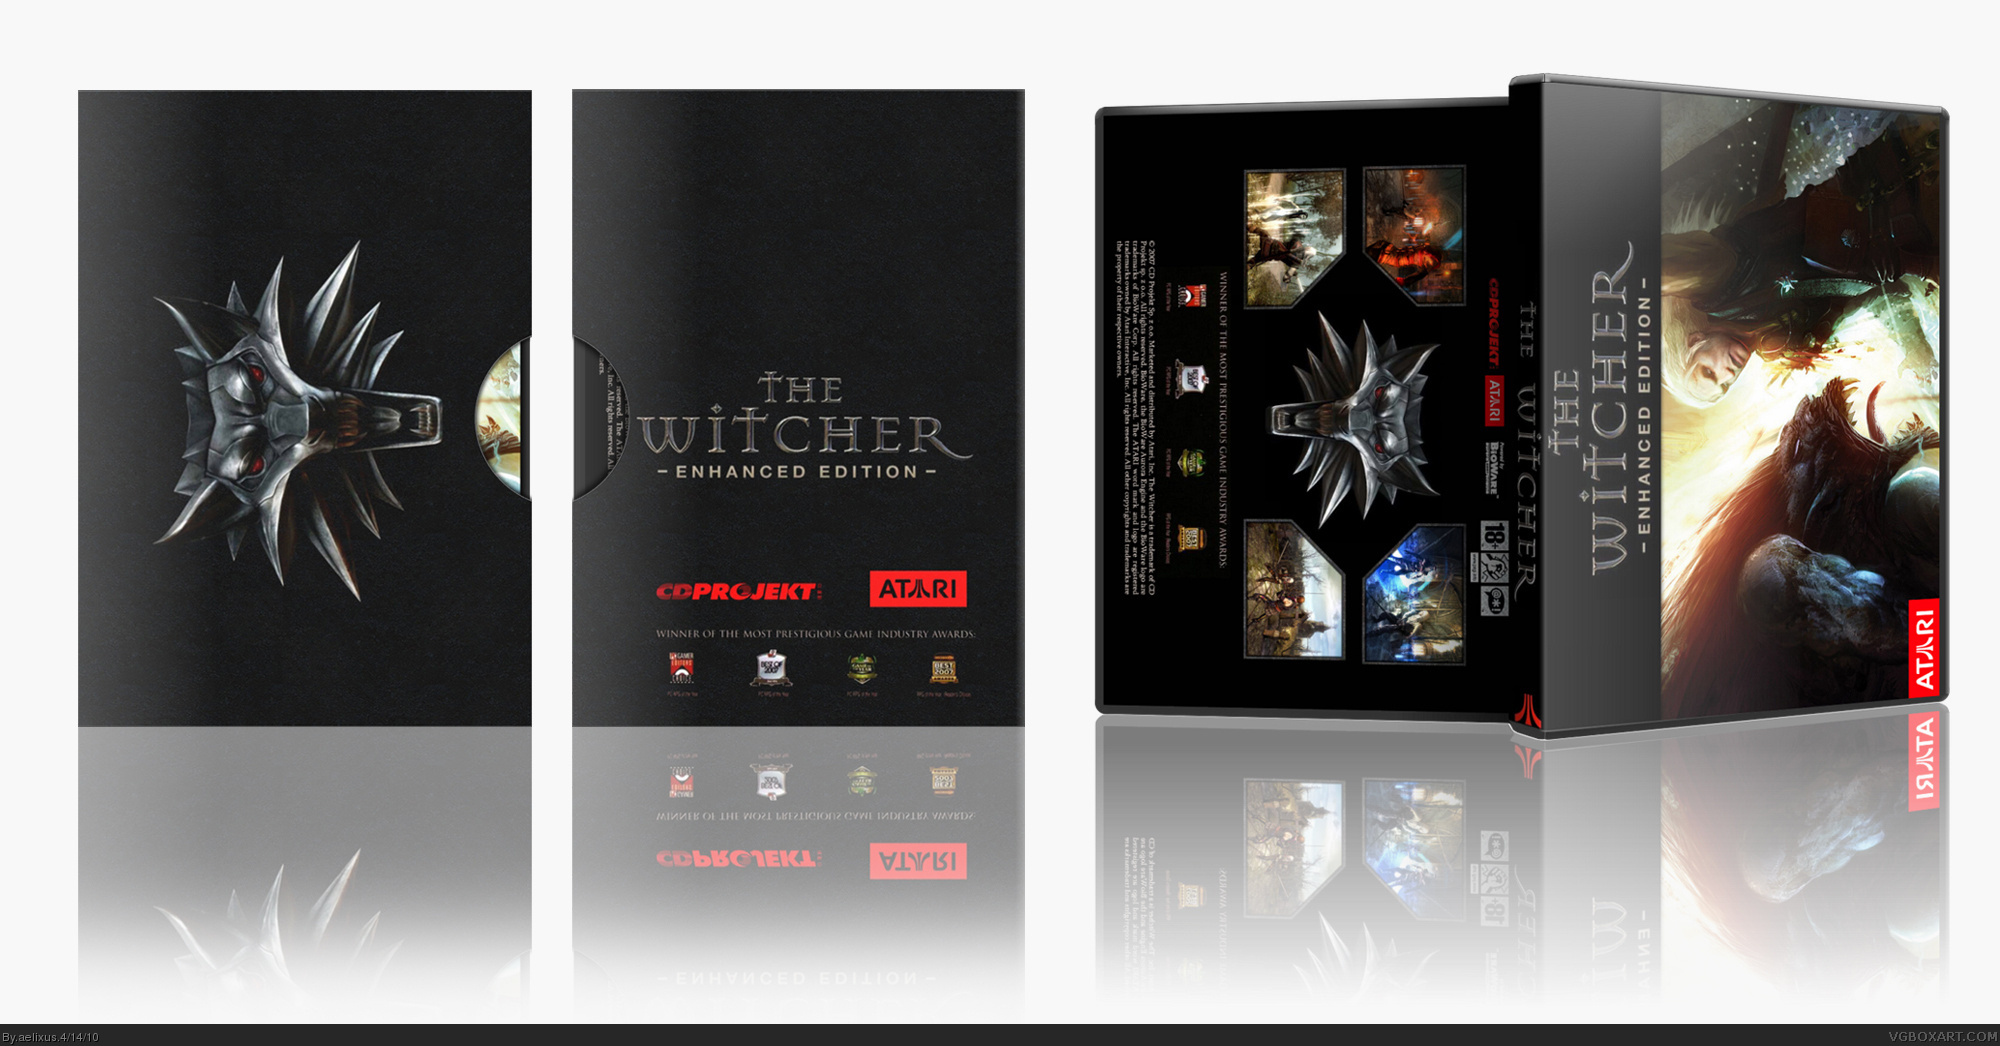 The Witcher Enhanced Edition box cover